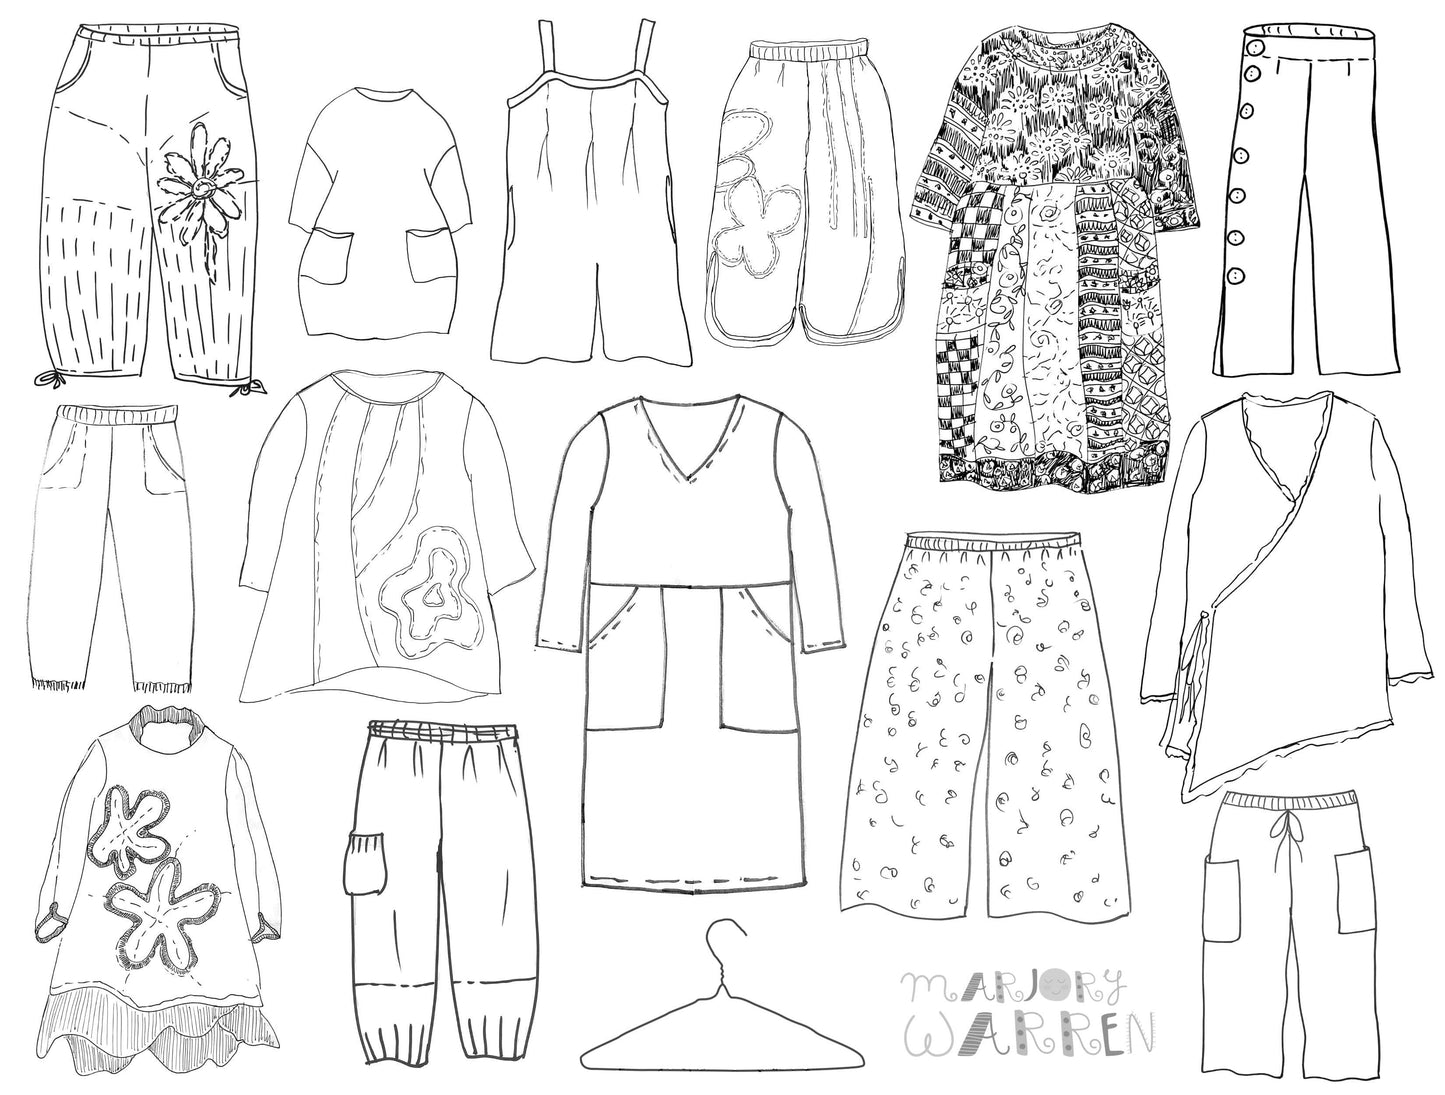 Line drawing of articles of clothing.